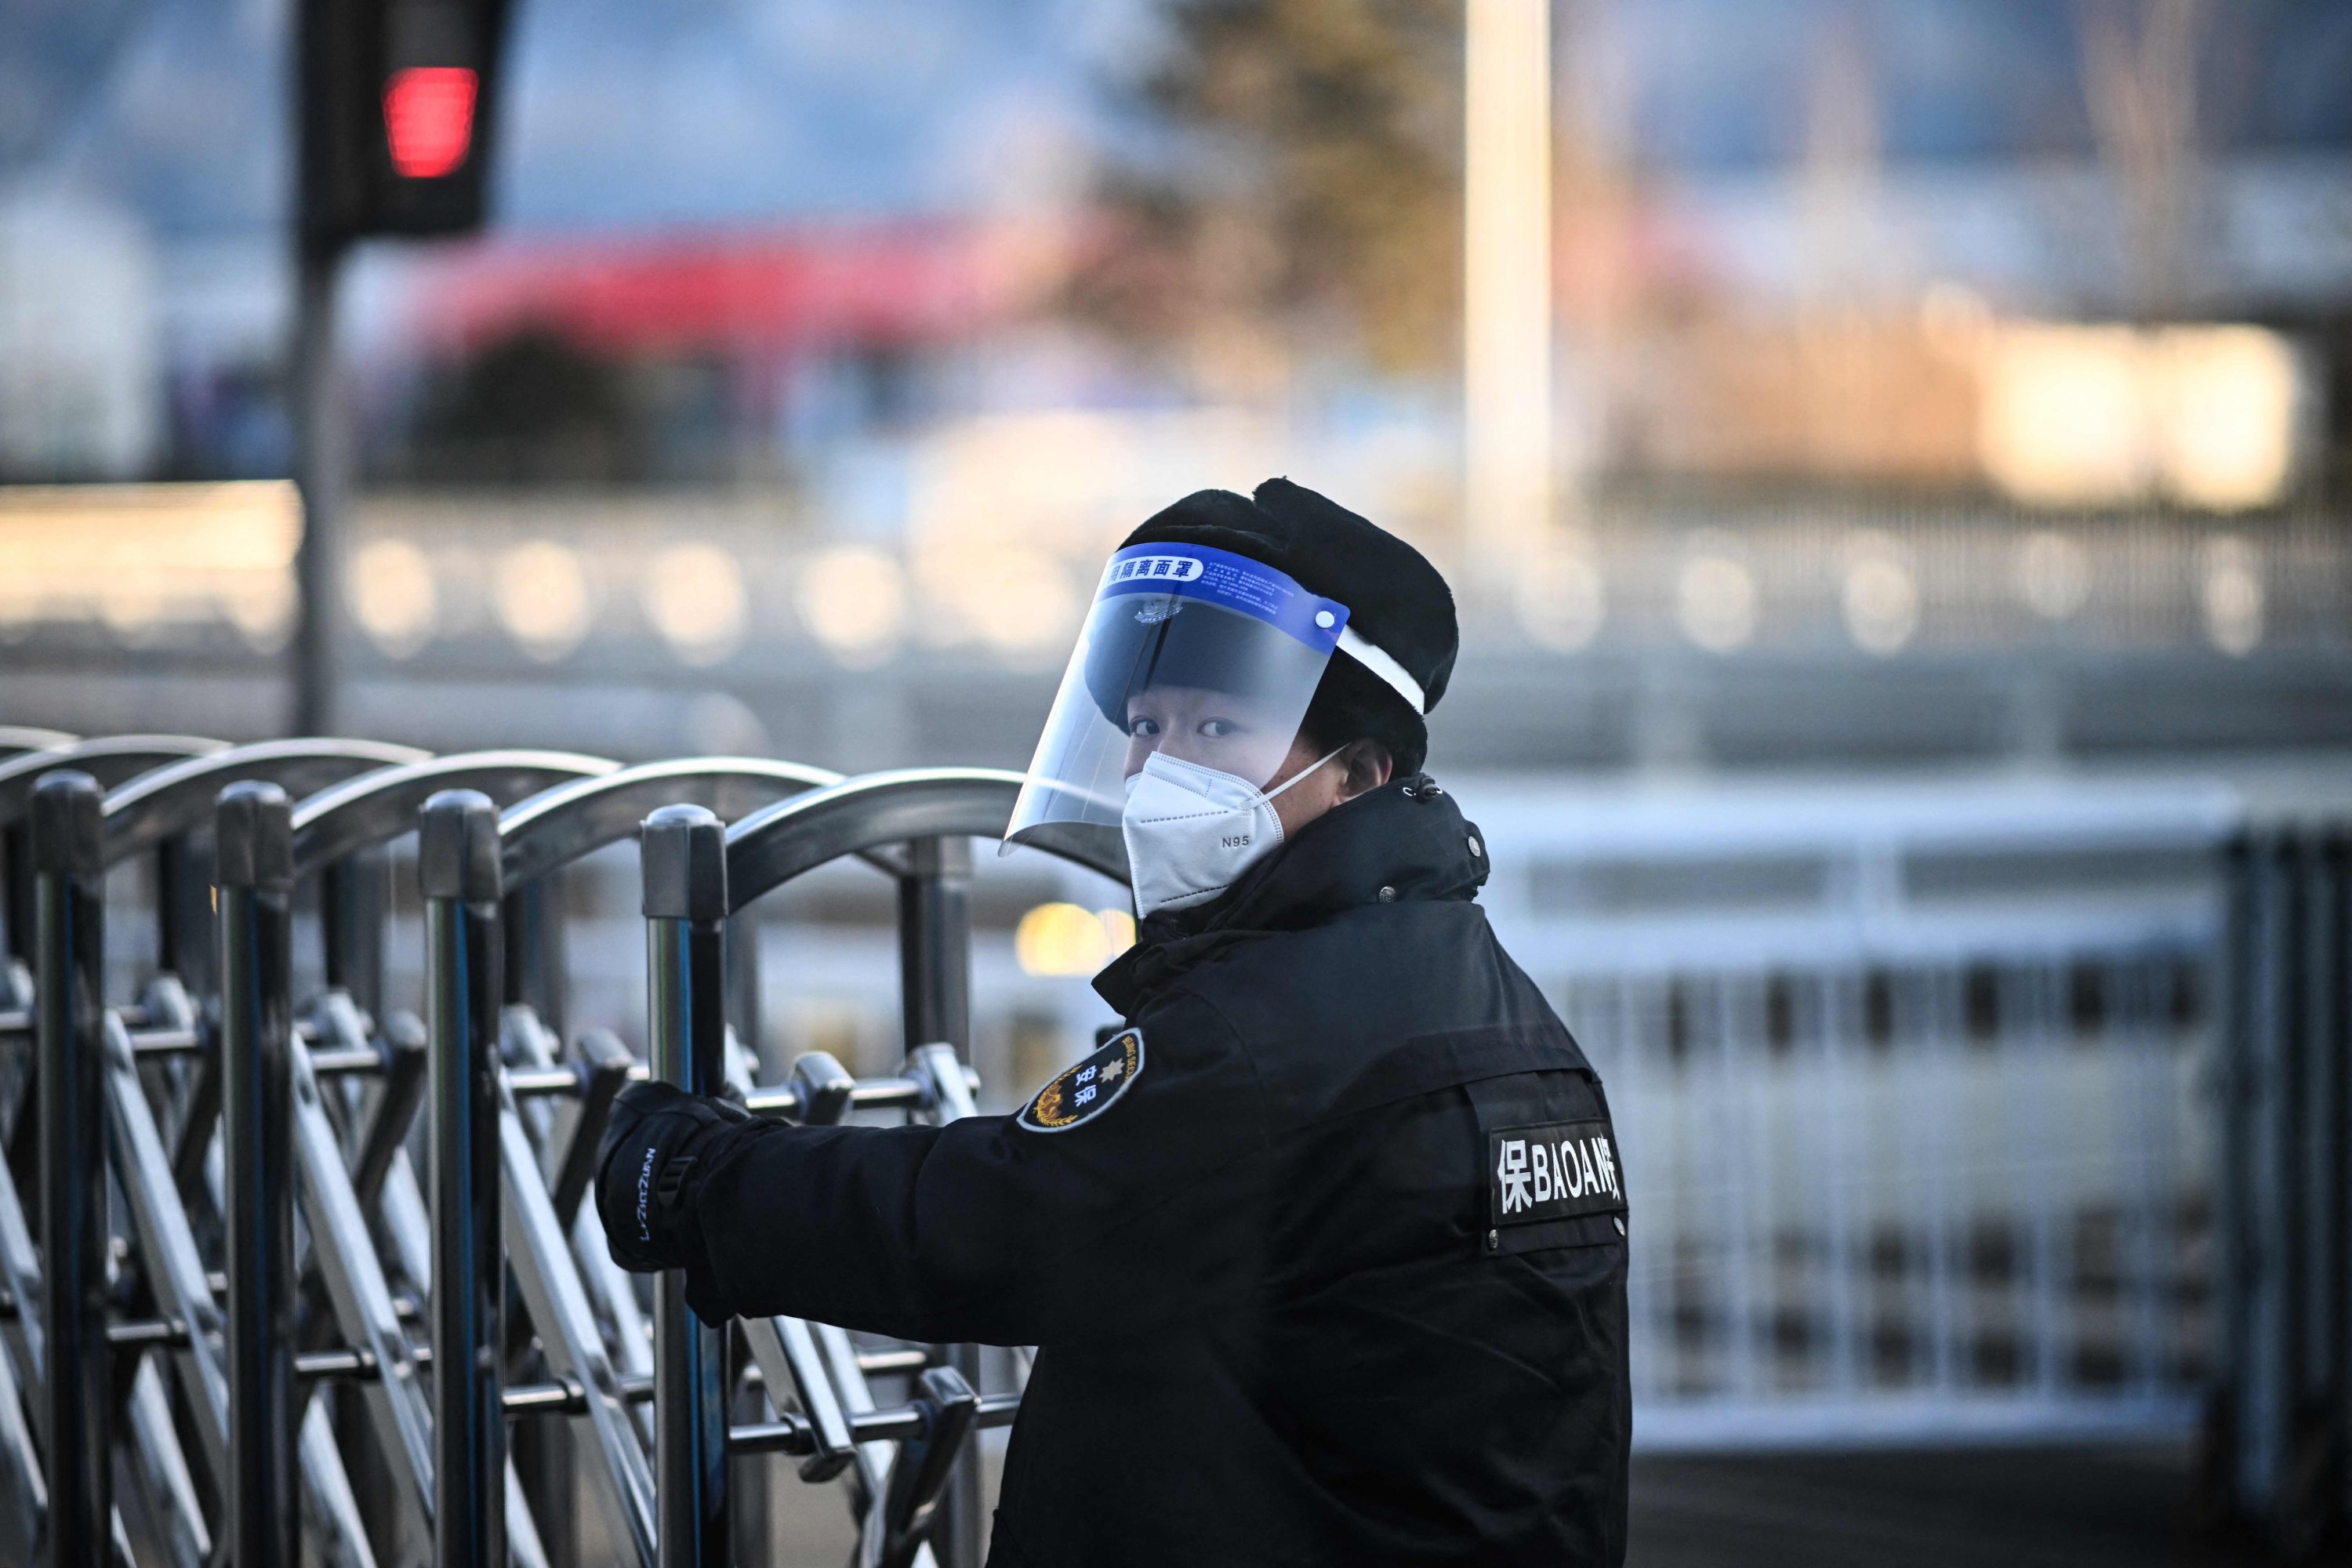 A security staff opens a barrier at a checkpoint on a road within the Beijing Games closed-loop bubble, Beijing, China, Feb. 3, 2022. (AFP Photo)